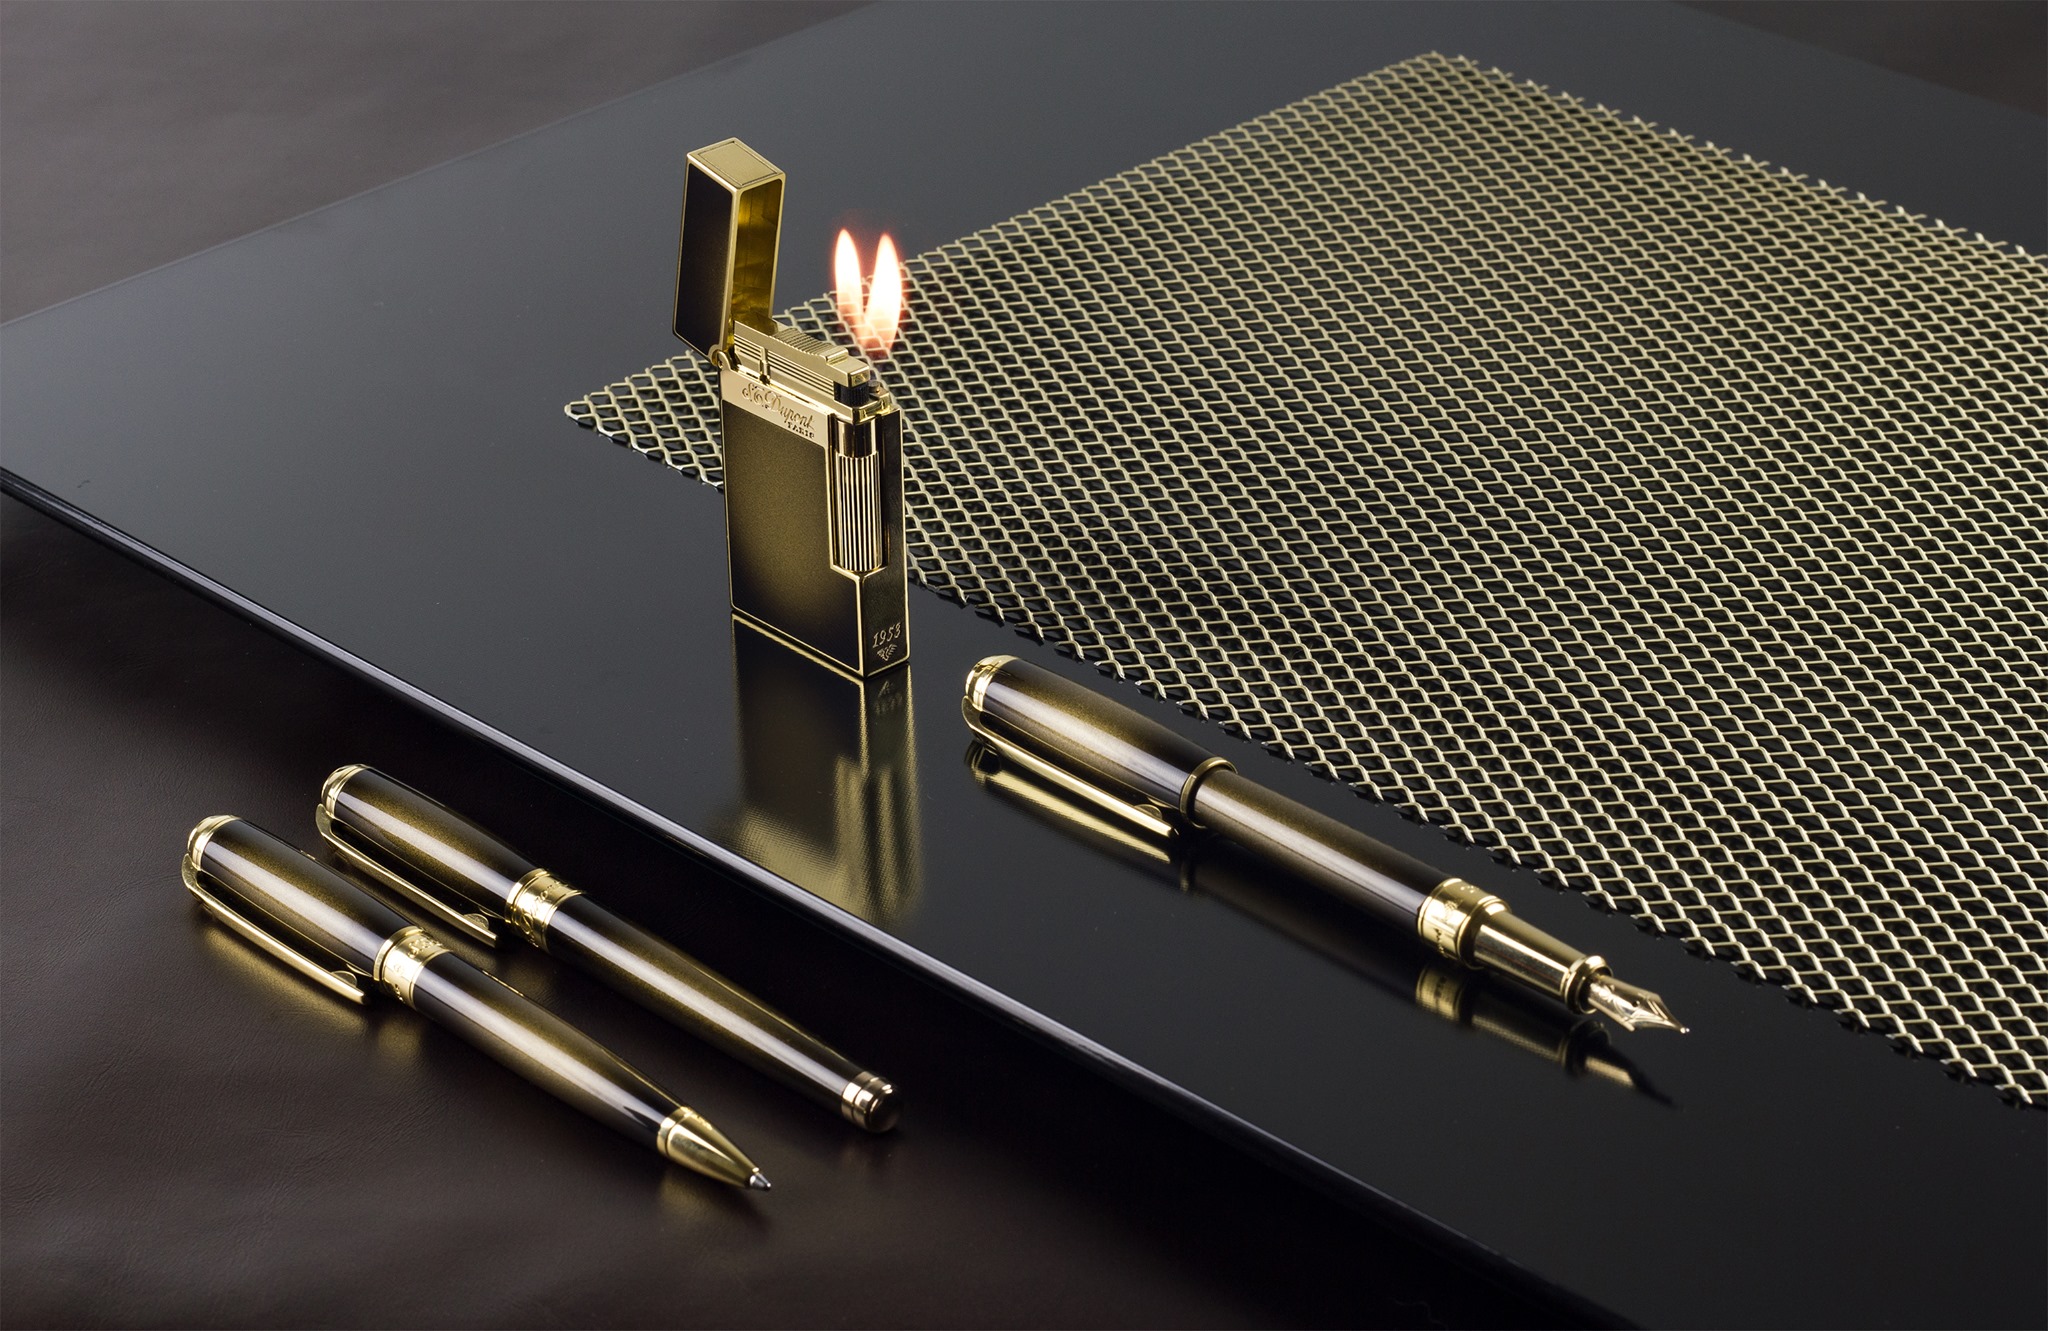 Discover the new “Ligne 2” Atelier Bronze lighter, with its famous “cling” when opened and its double flame cigar burner. 